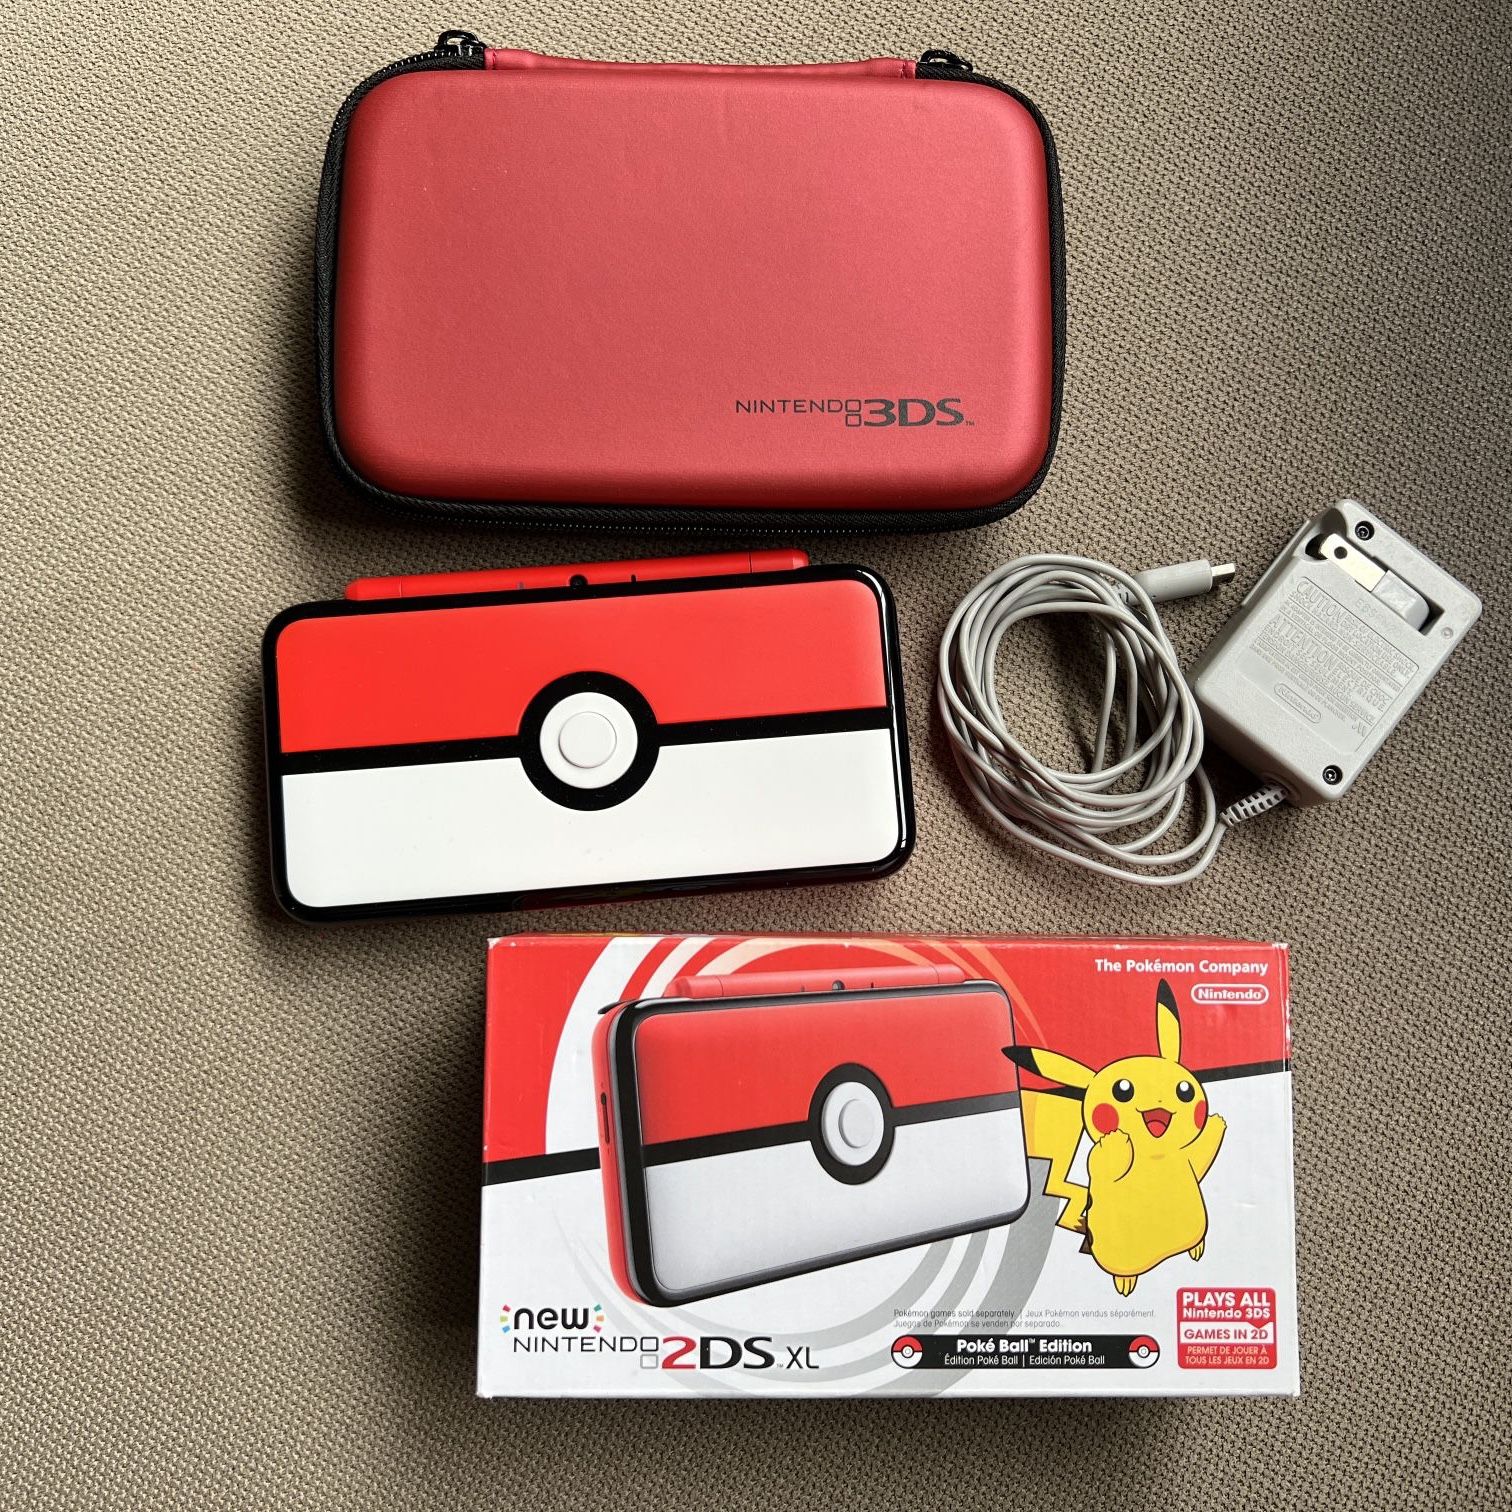 New Nintendo 2DS XL PokeBall Edition - Complete with Box - US Version